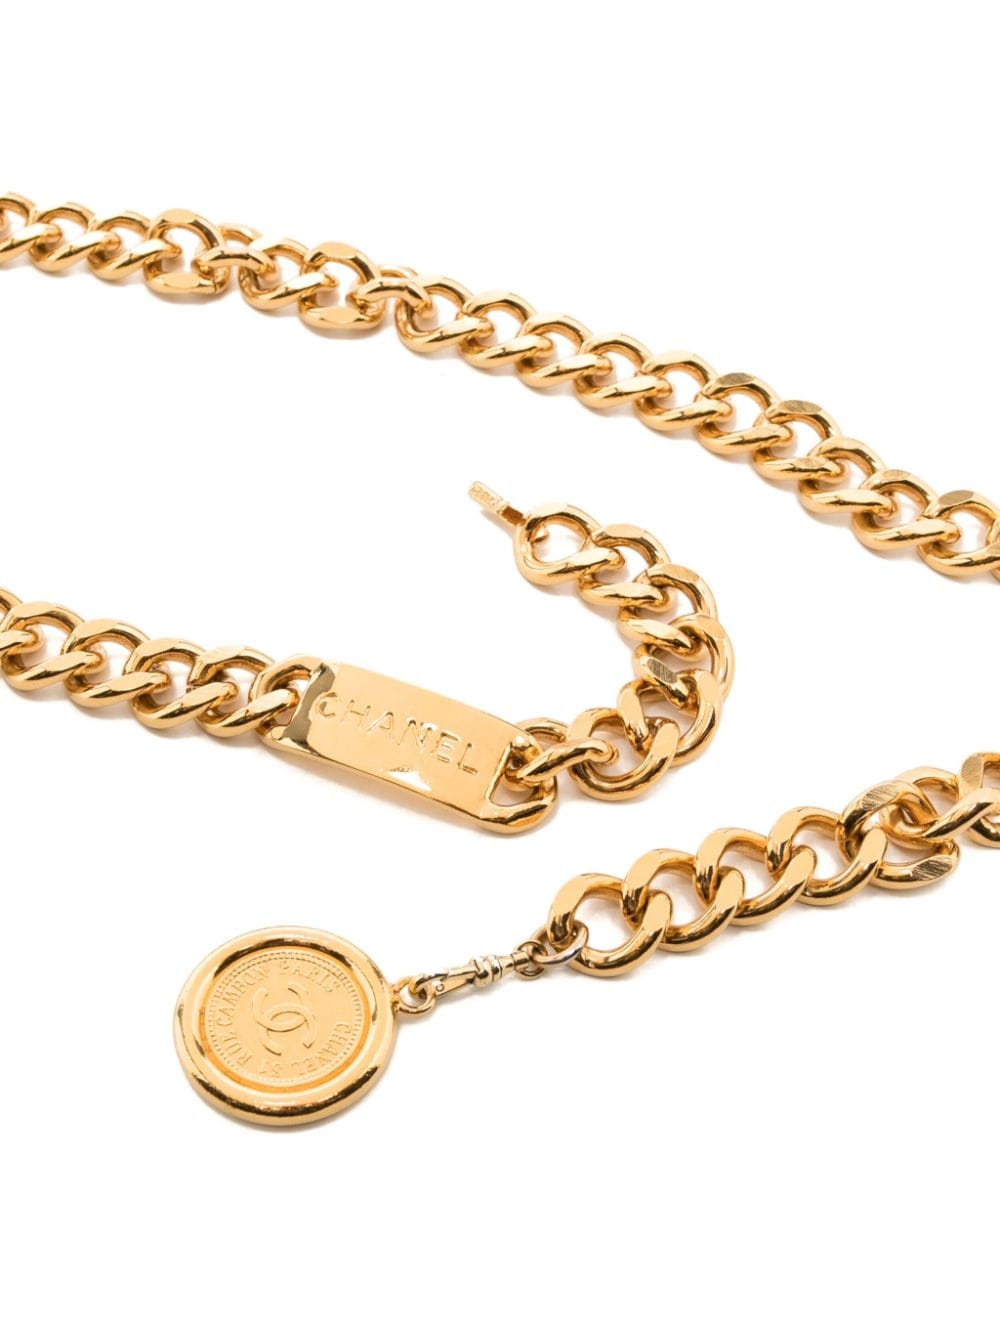 CHANEL Pre-Owned 1990-2000s Medallion Charm Chain Belt - Farfetch